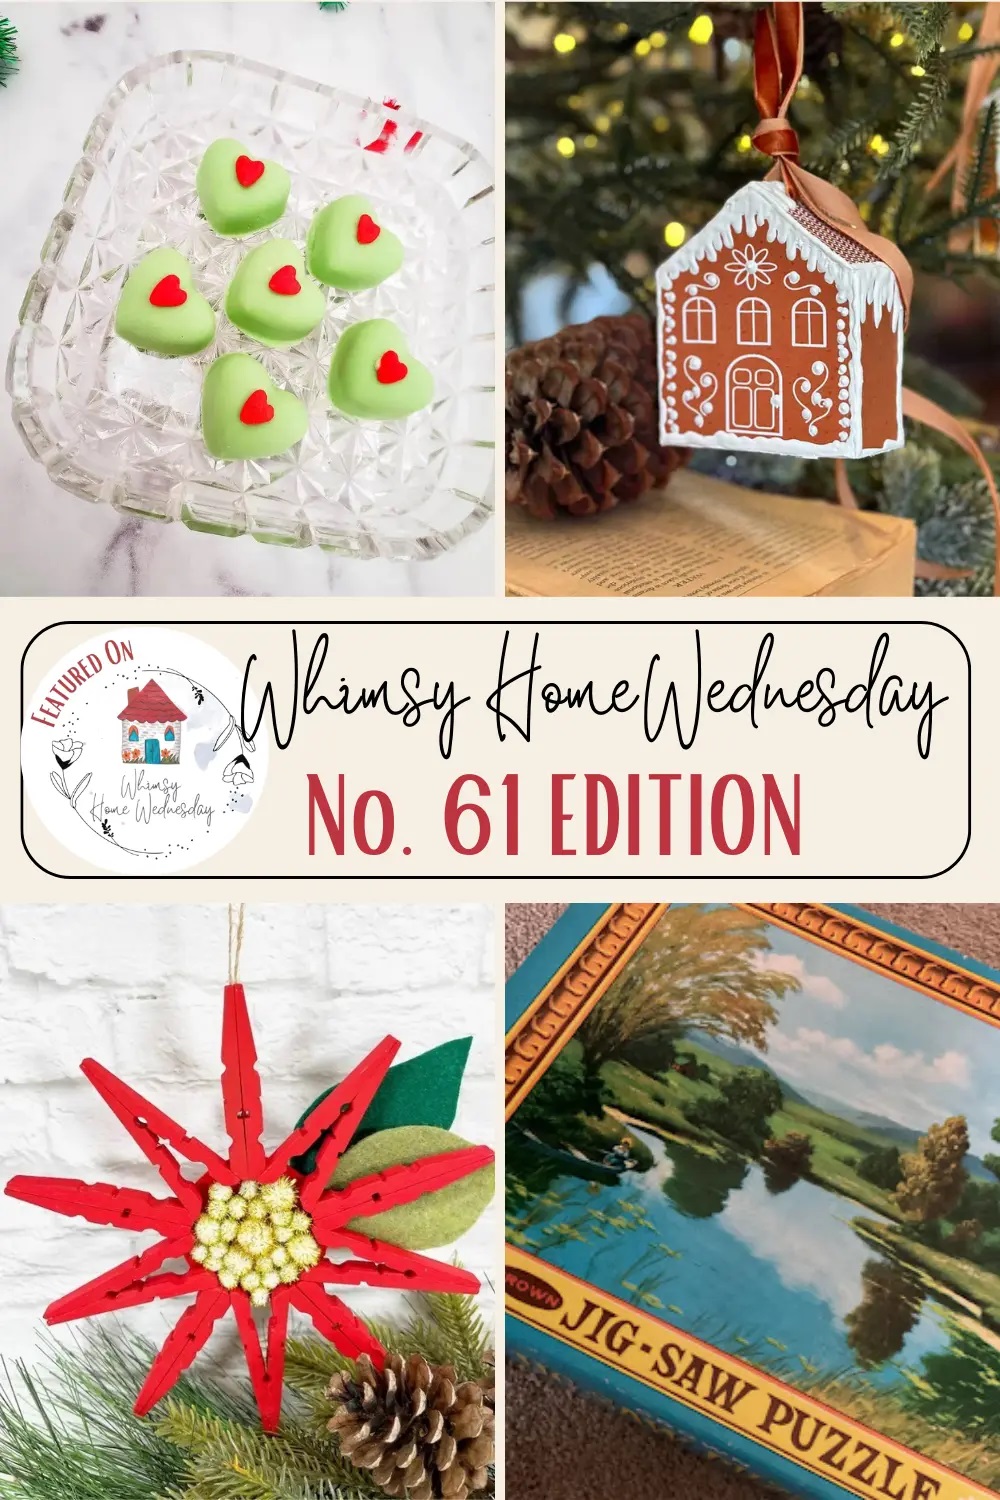 Join us on Whimsy Home Wednesday Blog Link Party No. 61 and see host projects, the features from the previous week and link up your posts!